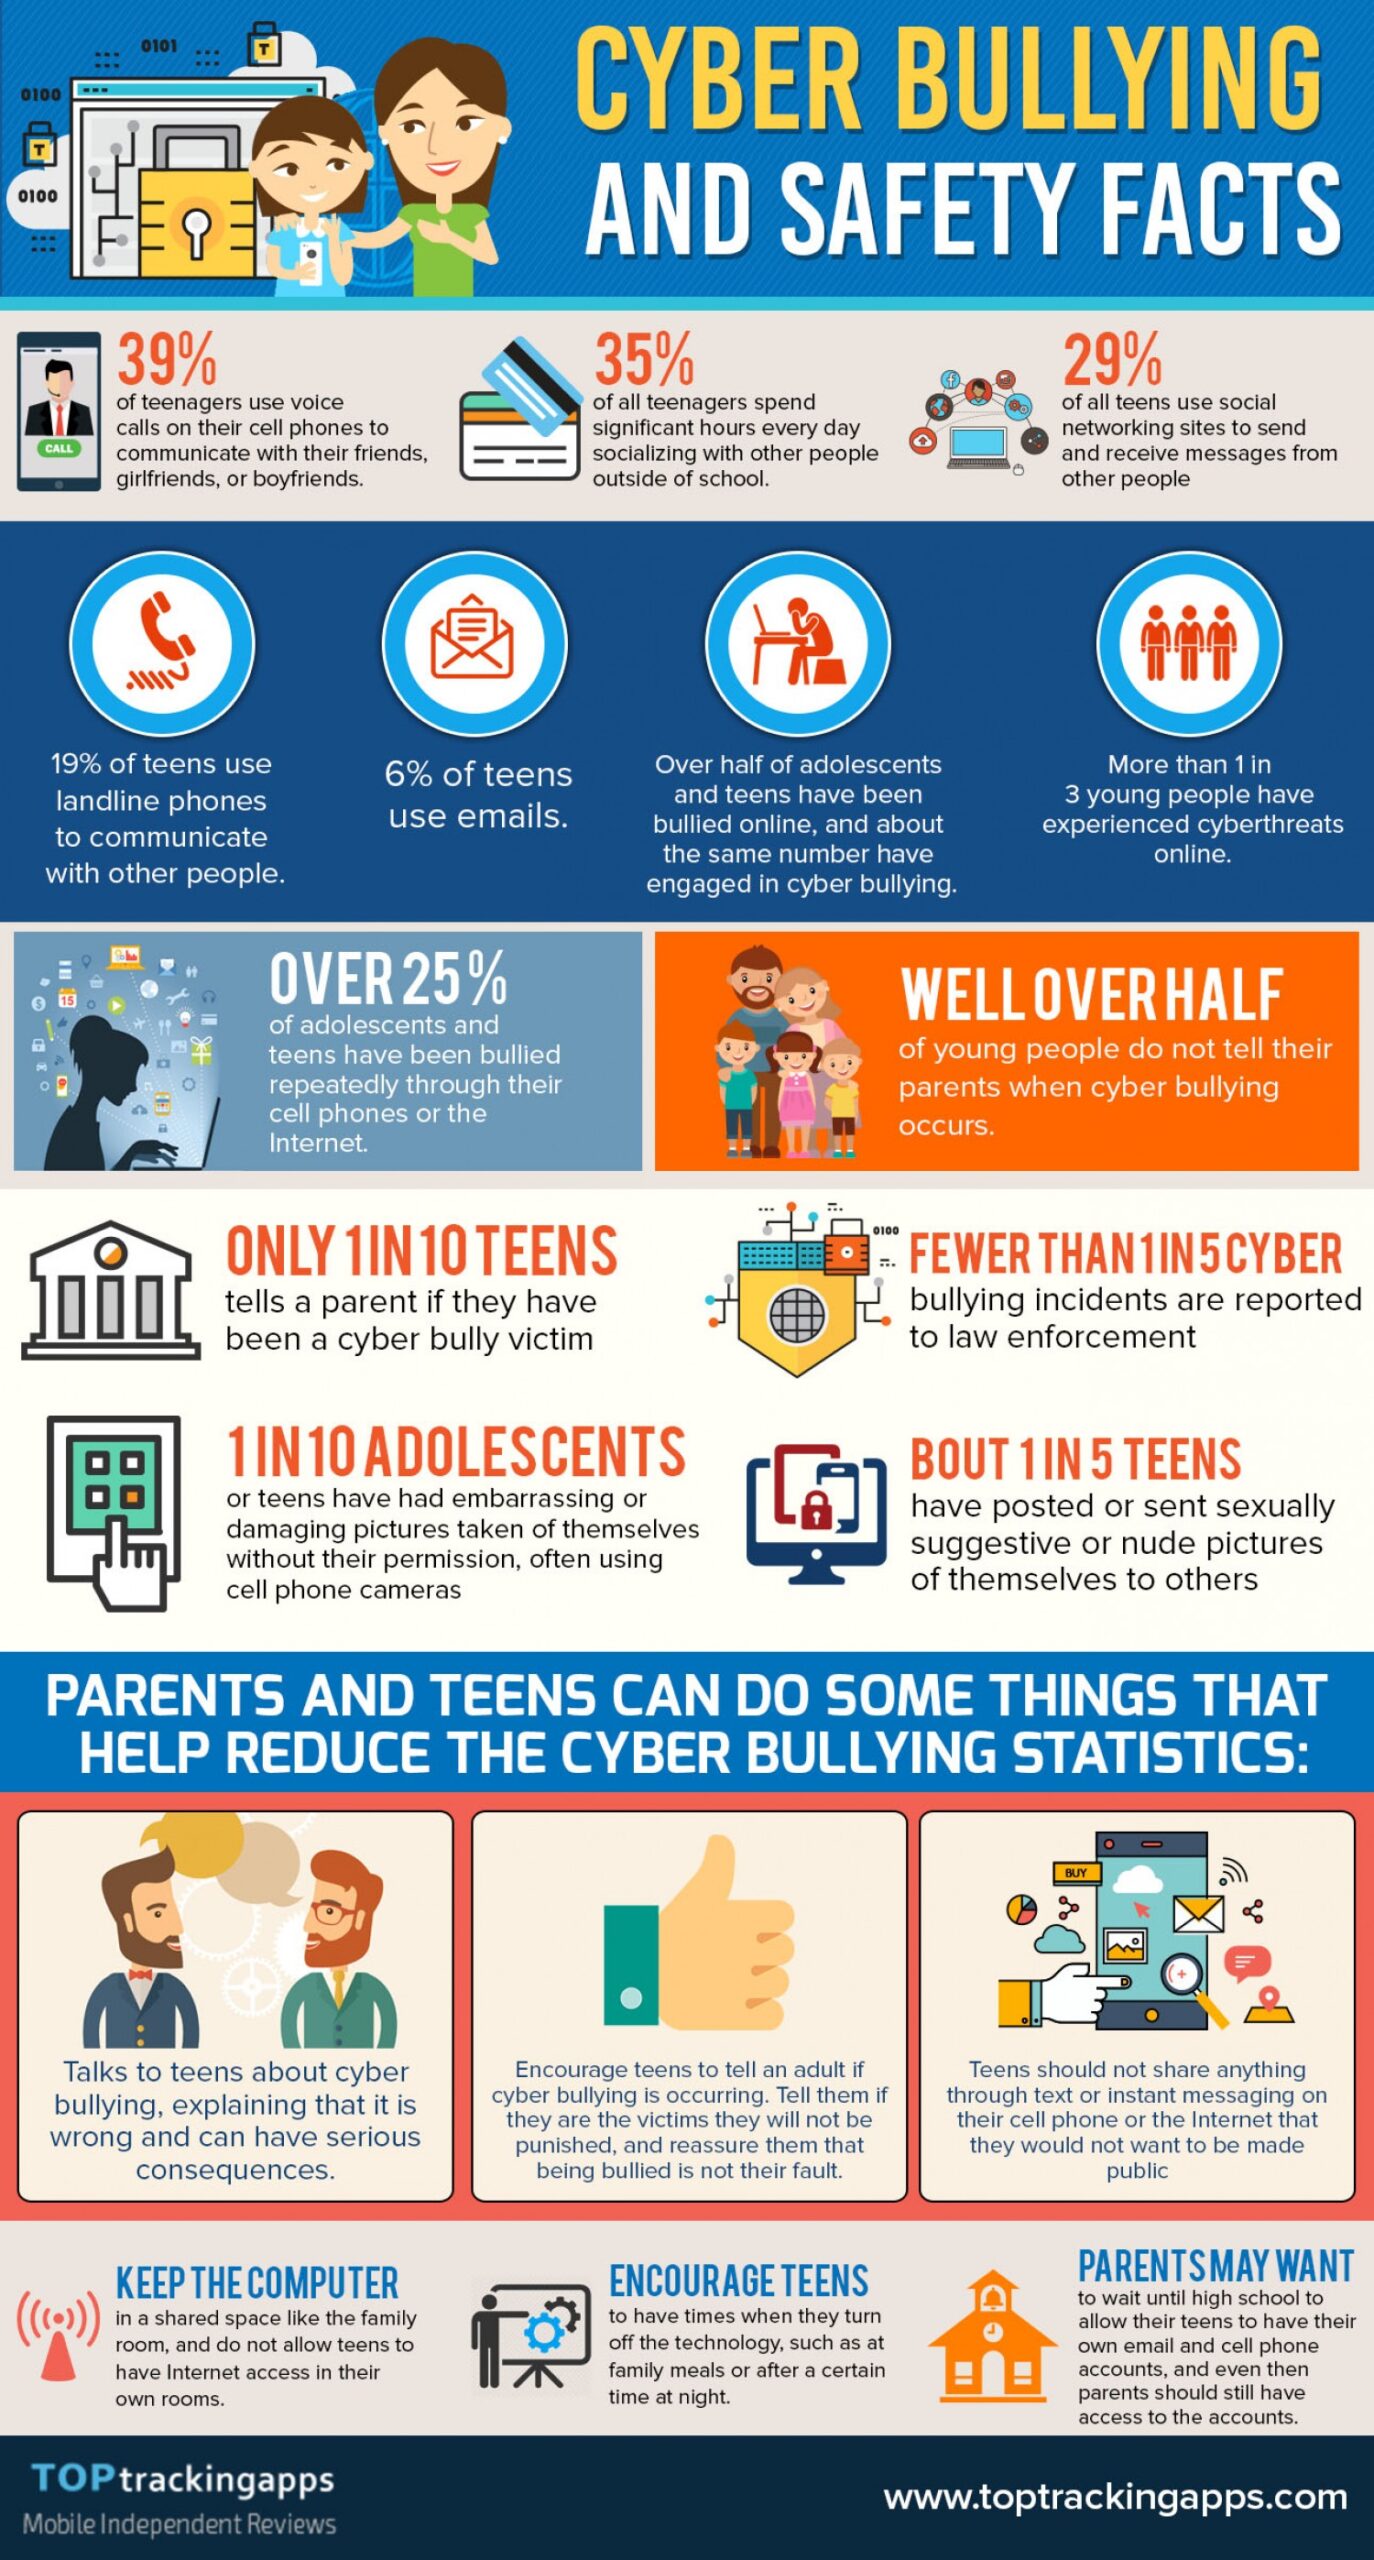 Facts And Solutions For Cyber Bullying - Infographic